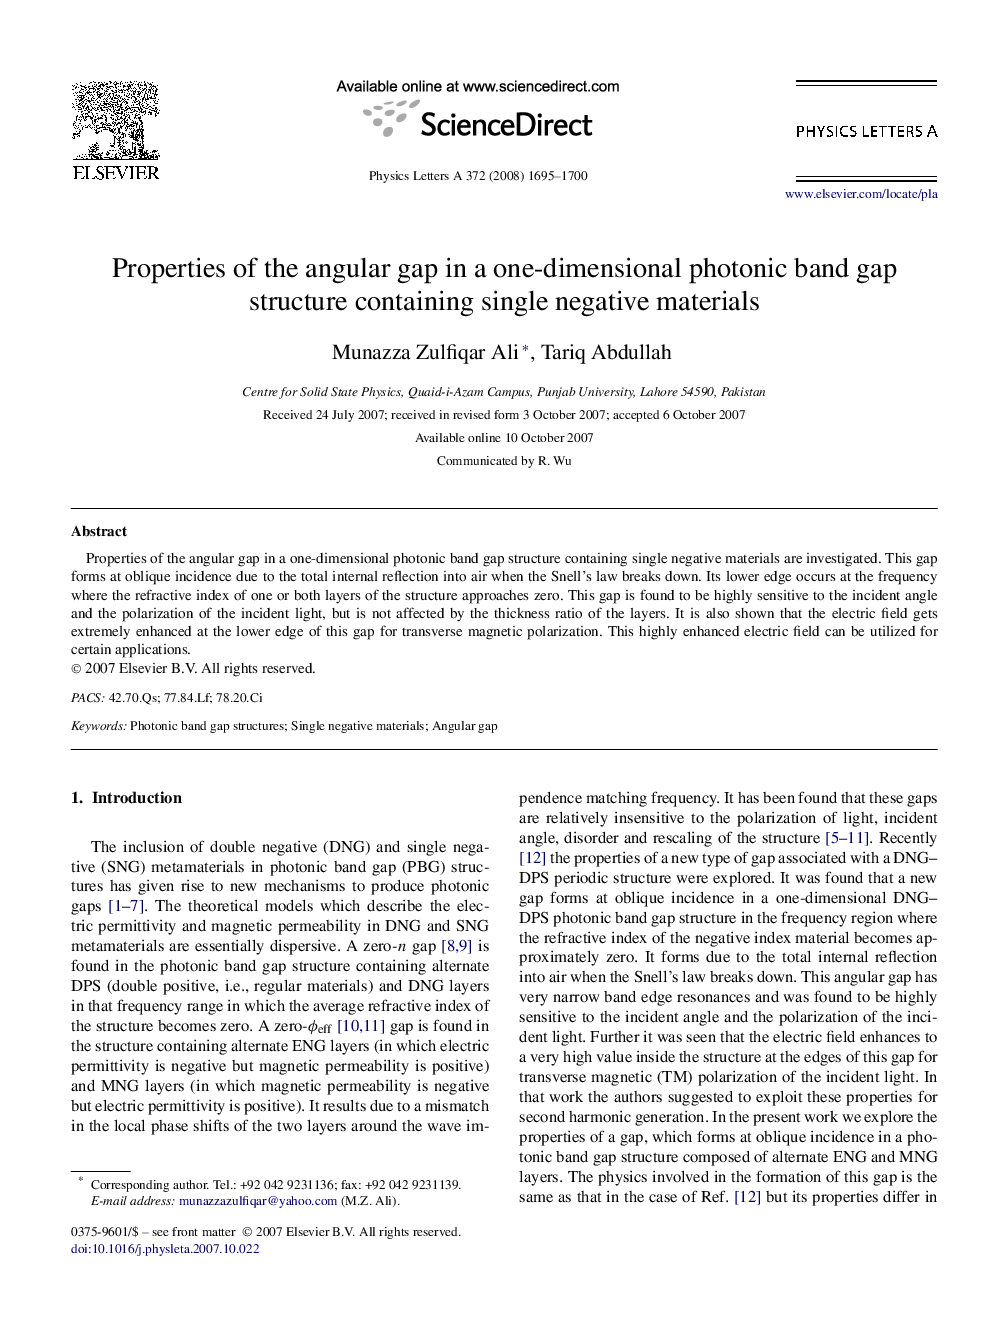 Properties of the angular gap in a one-dimensional photonic band gap structure containing single negative materials